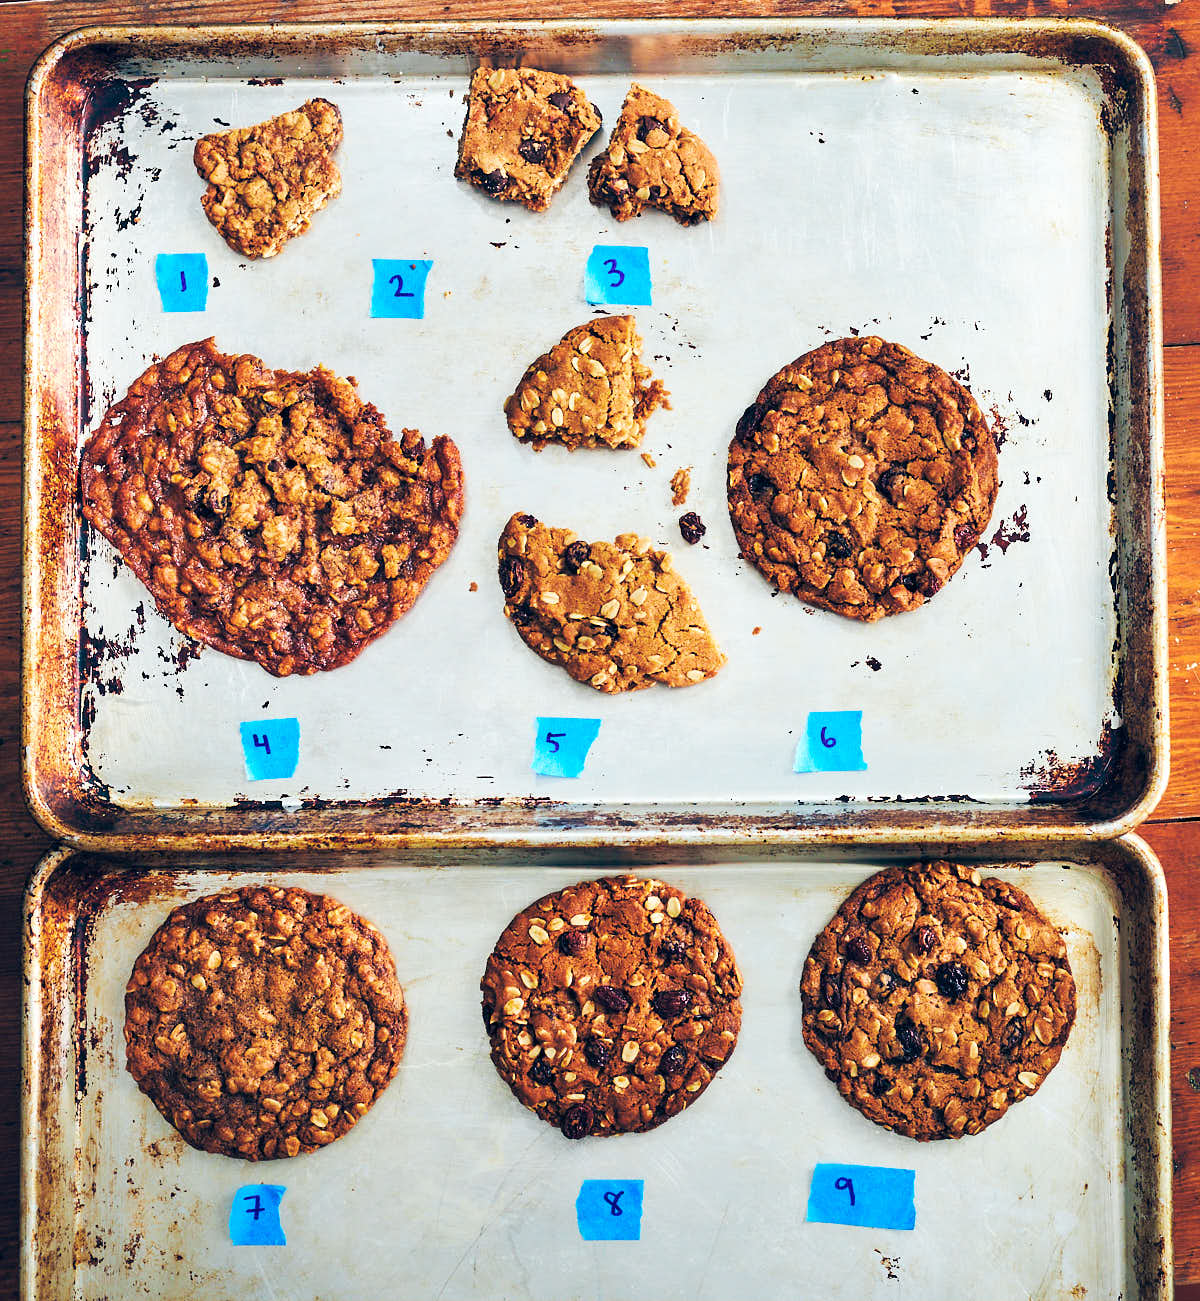 Baking sheets filled with different cookies from recipe testing.